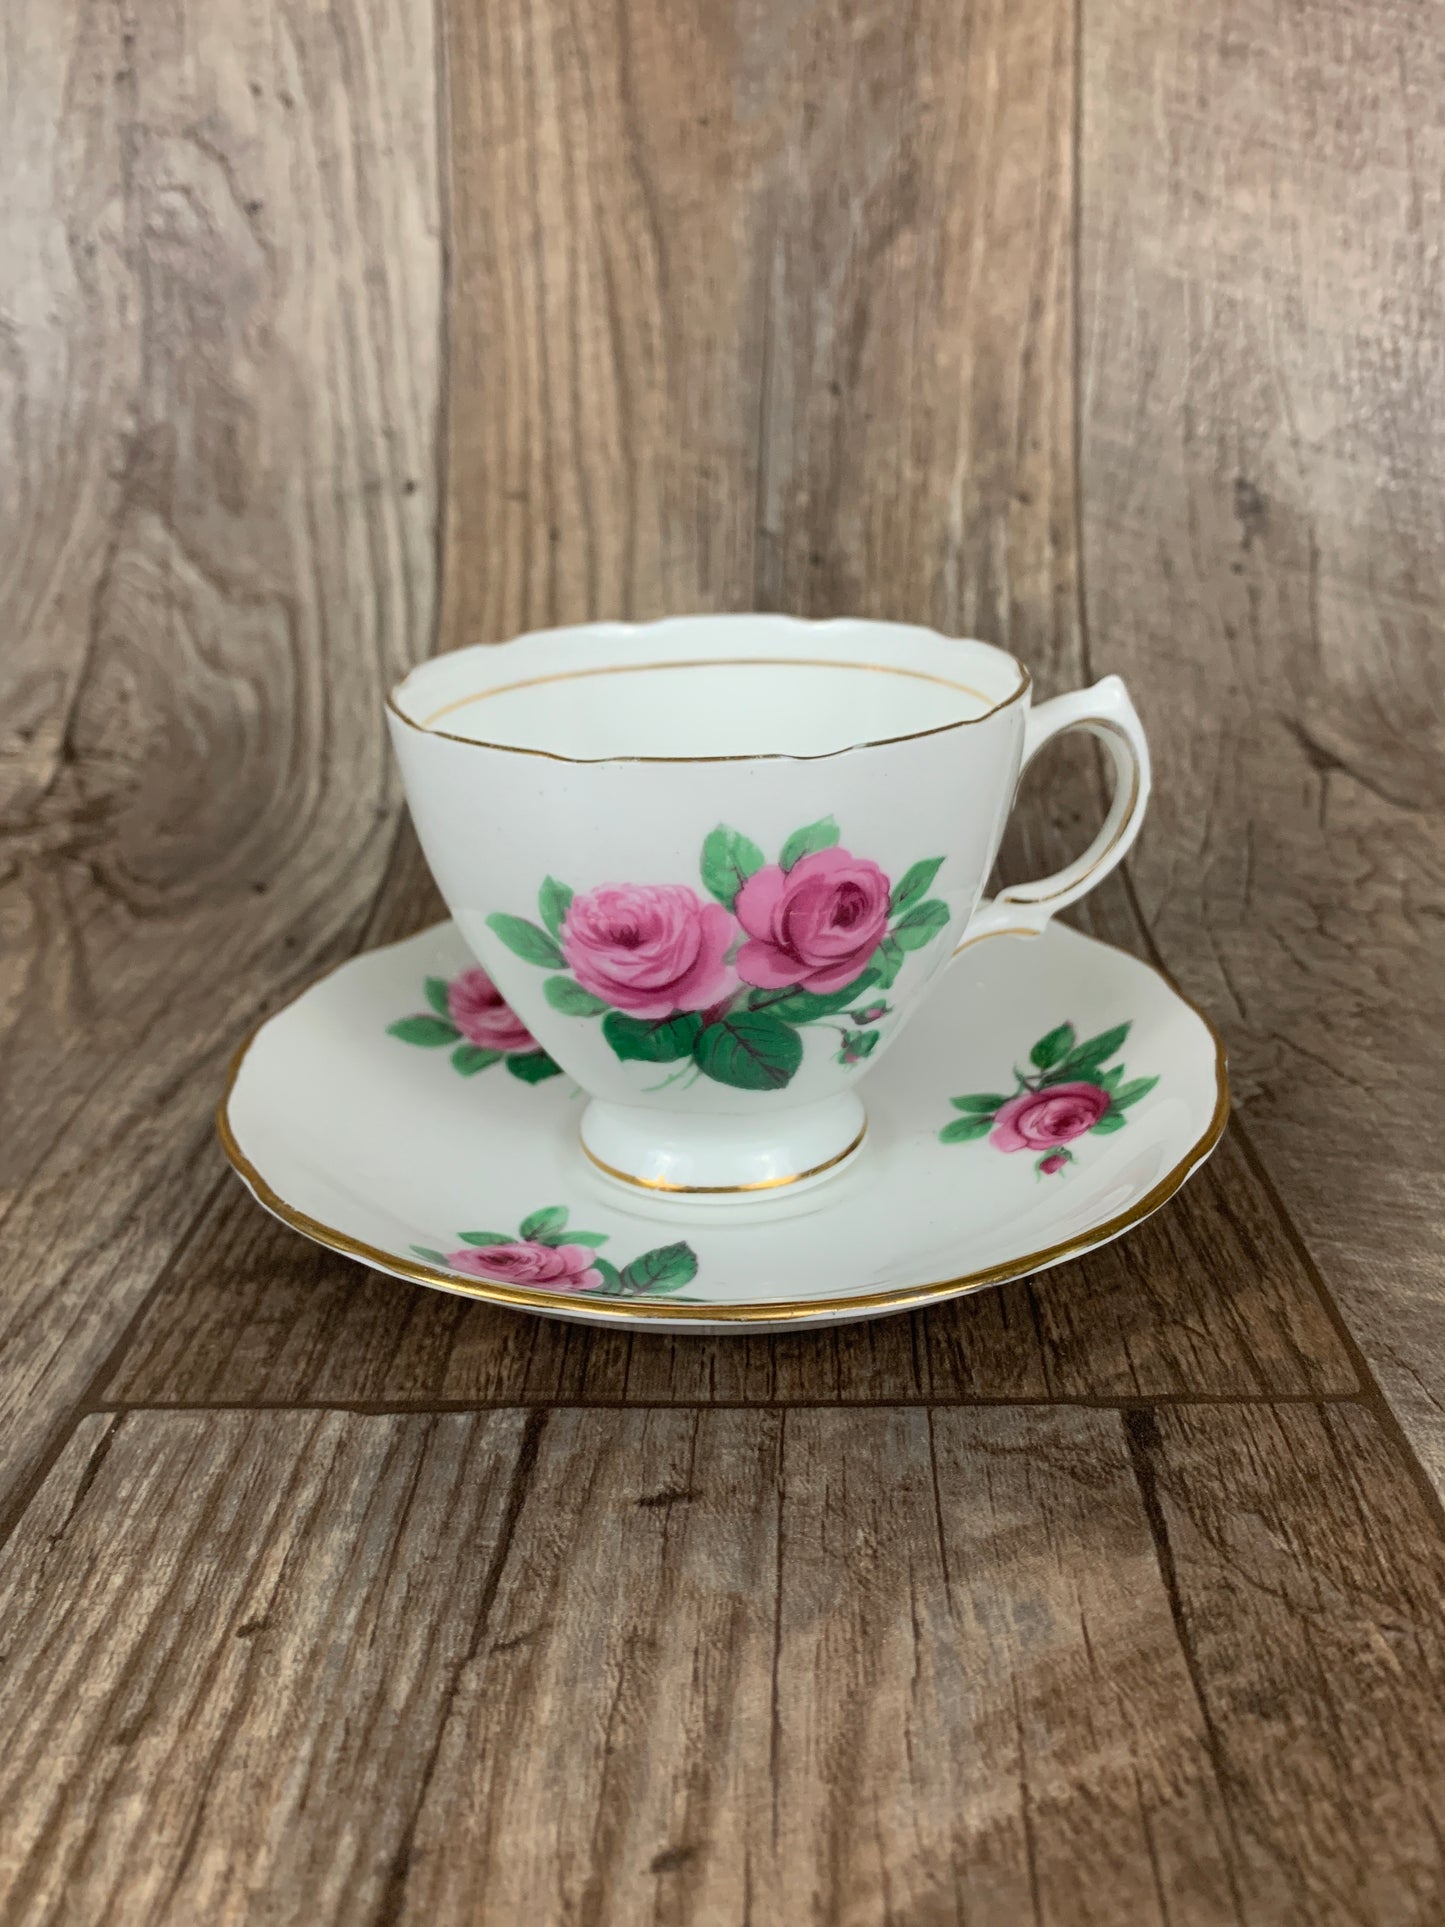 Royal Vale Pink Rose Vintage Tea Cup and Saucer Gifts for Mom Vintage China Cups